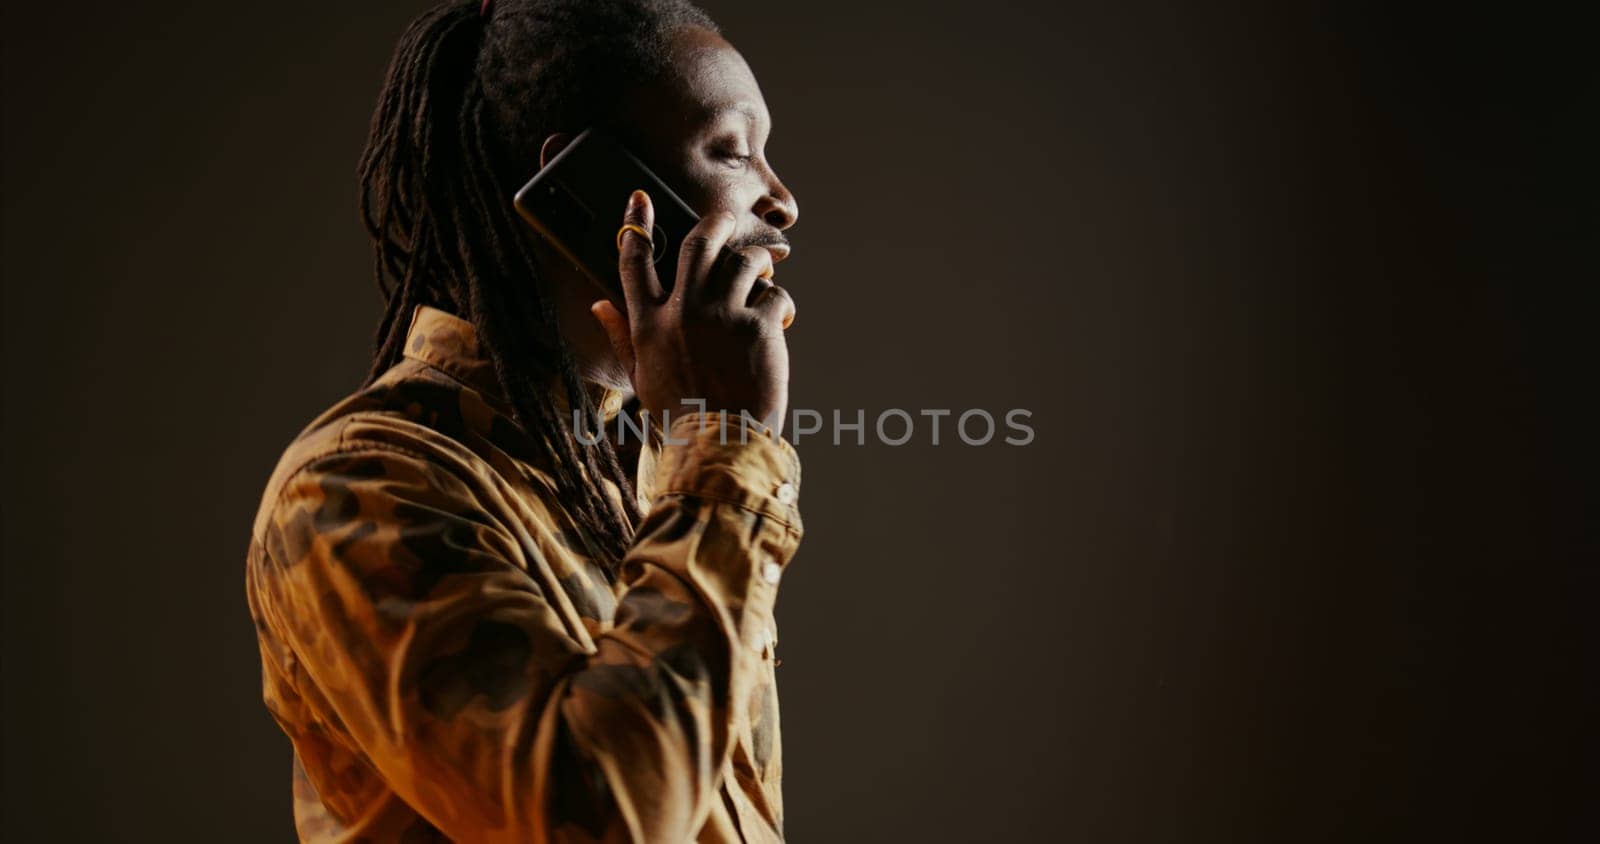 Cool guy with dreads answering phone call in studio, talking to friends or family on camera. African american trendy adult chatting remotely with people on telephone line. Handheld shot.